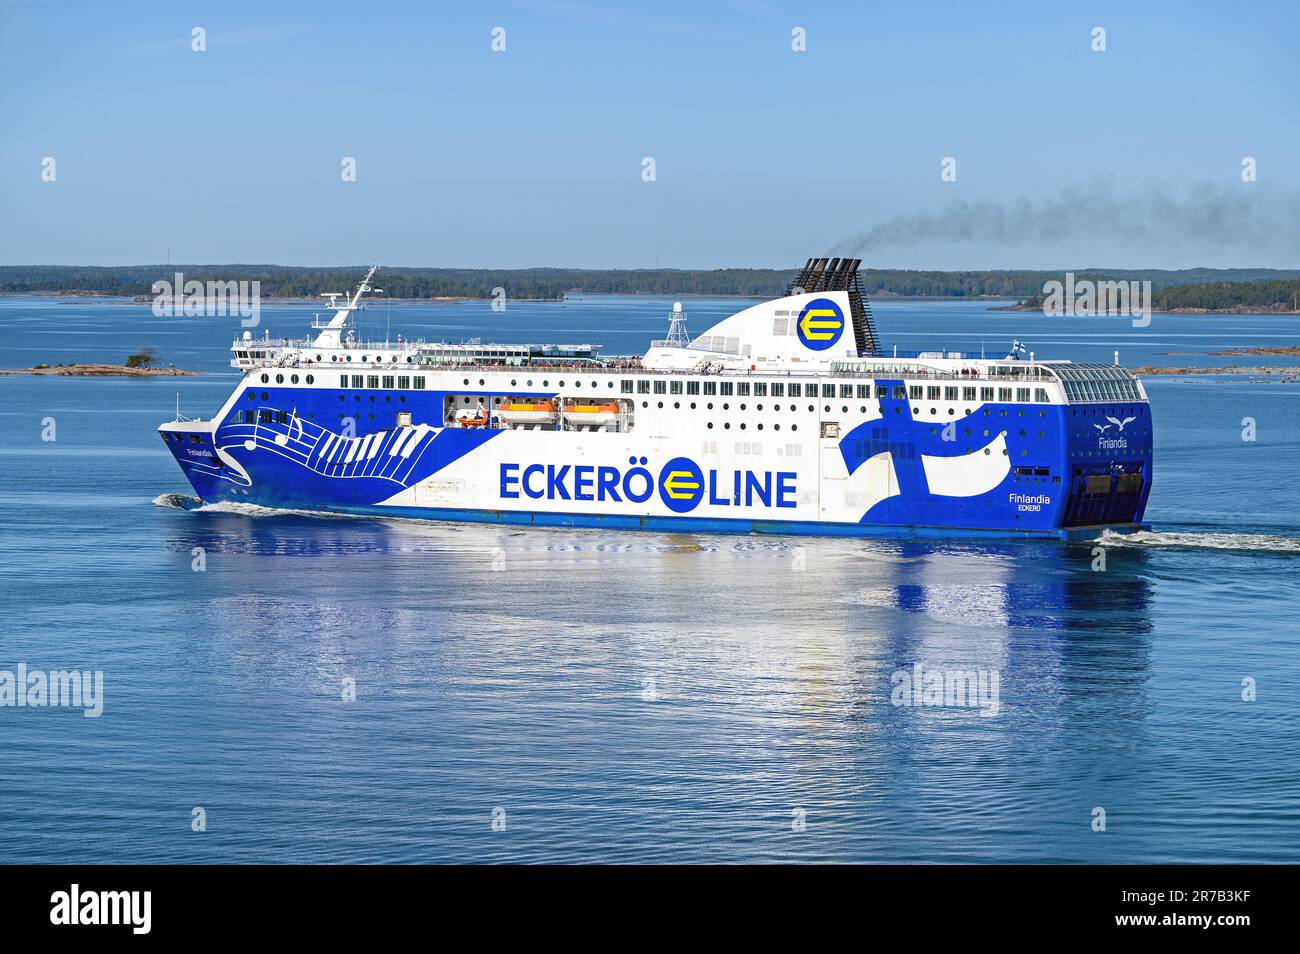 Finlandia is a ferry operated by the Finnish company Eckero Line on the route between Helsinki and Tallinn. Stock Photo